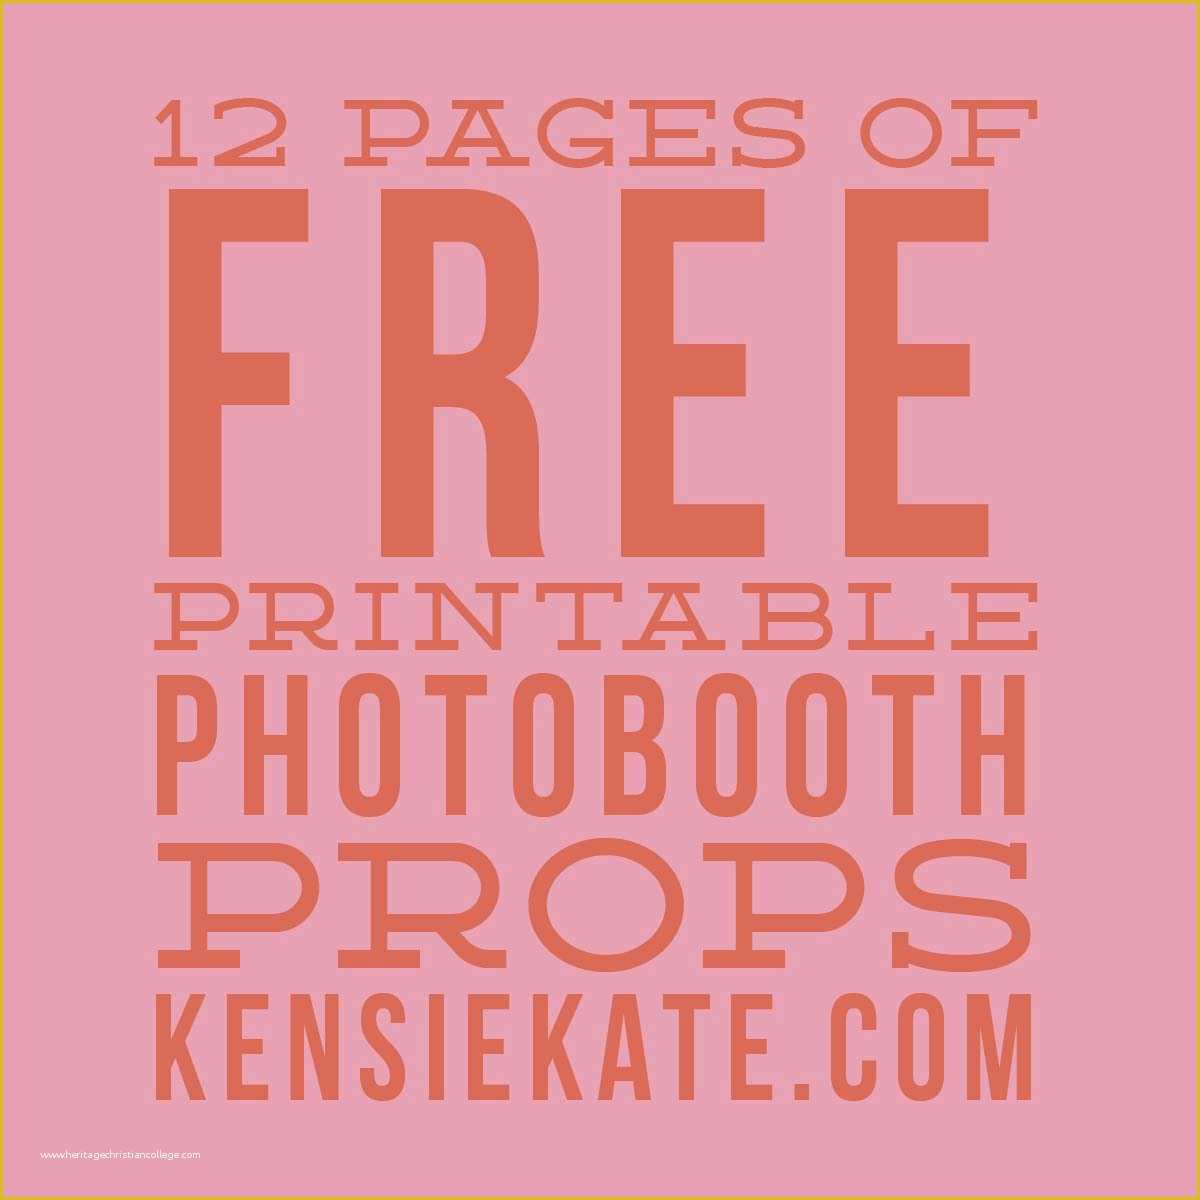 Free Printable Photo Booth Sign Template Of 12 Pages Of Free Printable Photobooth Props — Kensie Kate